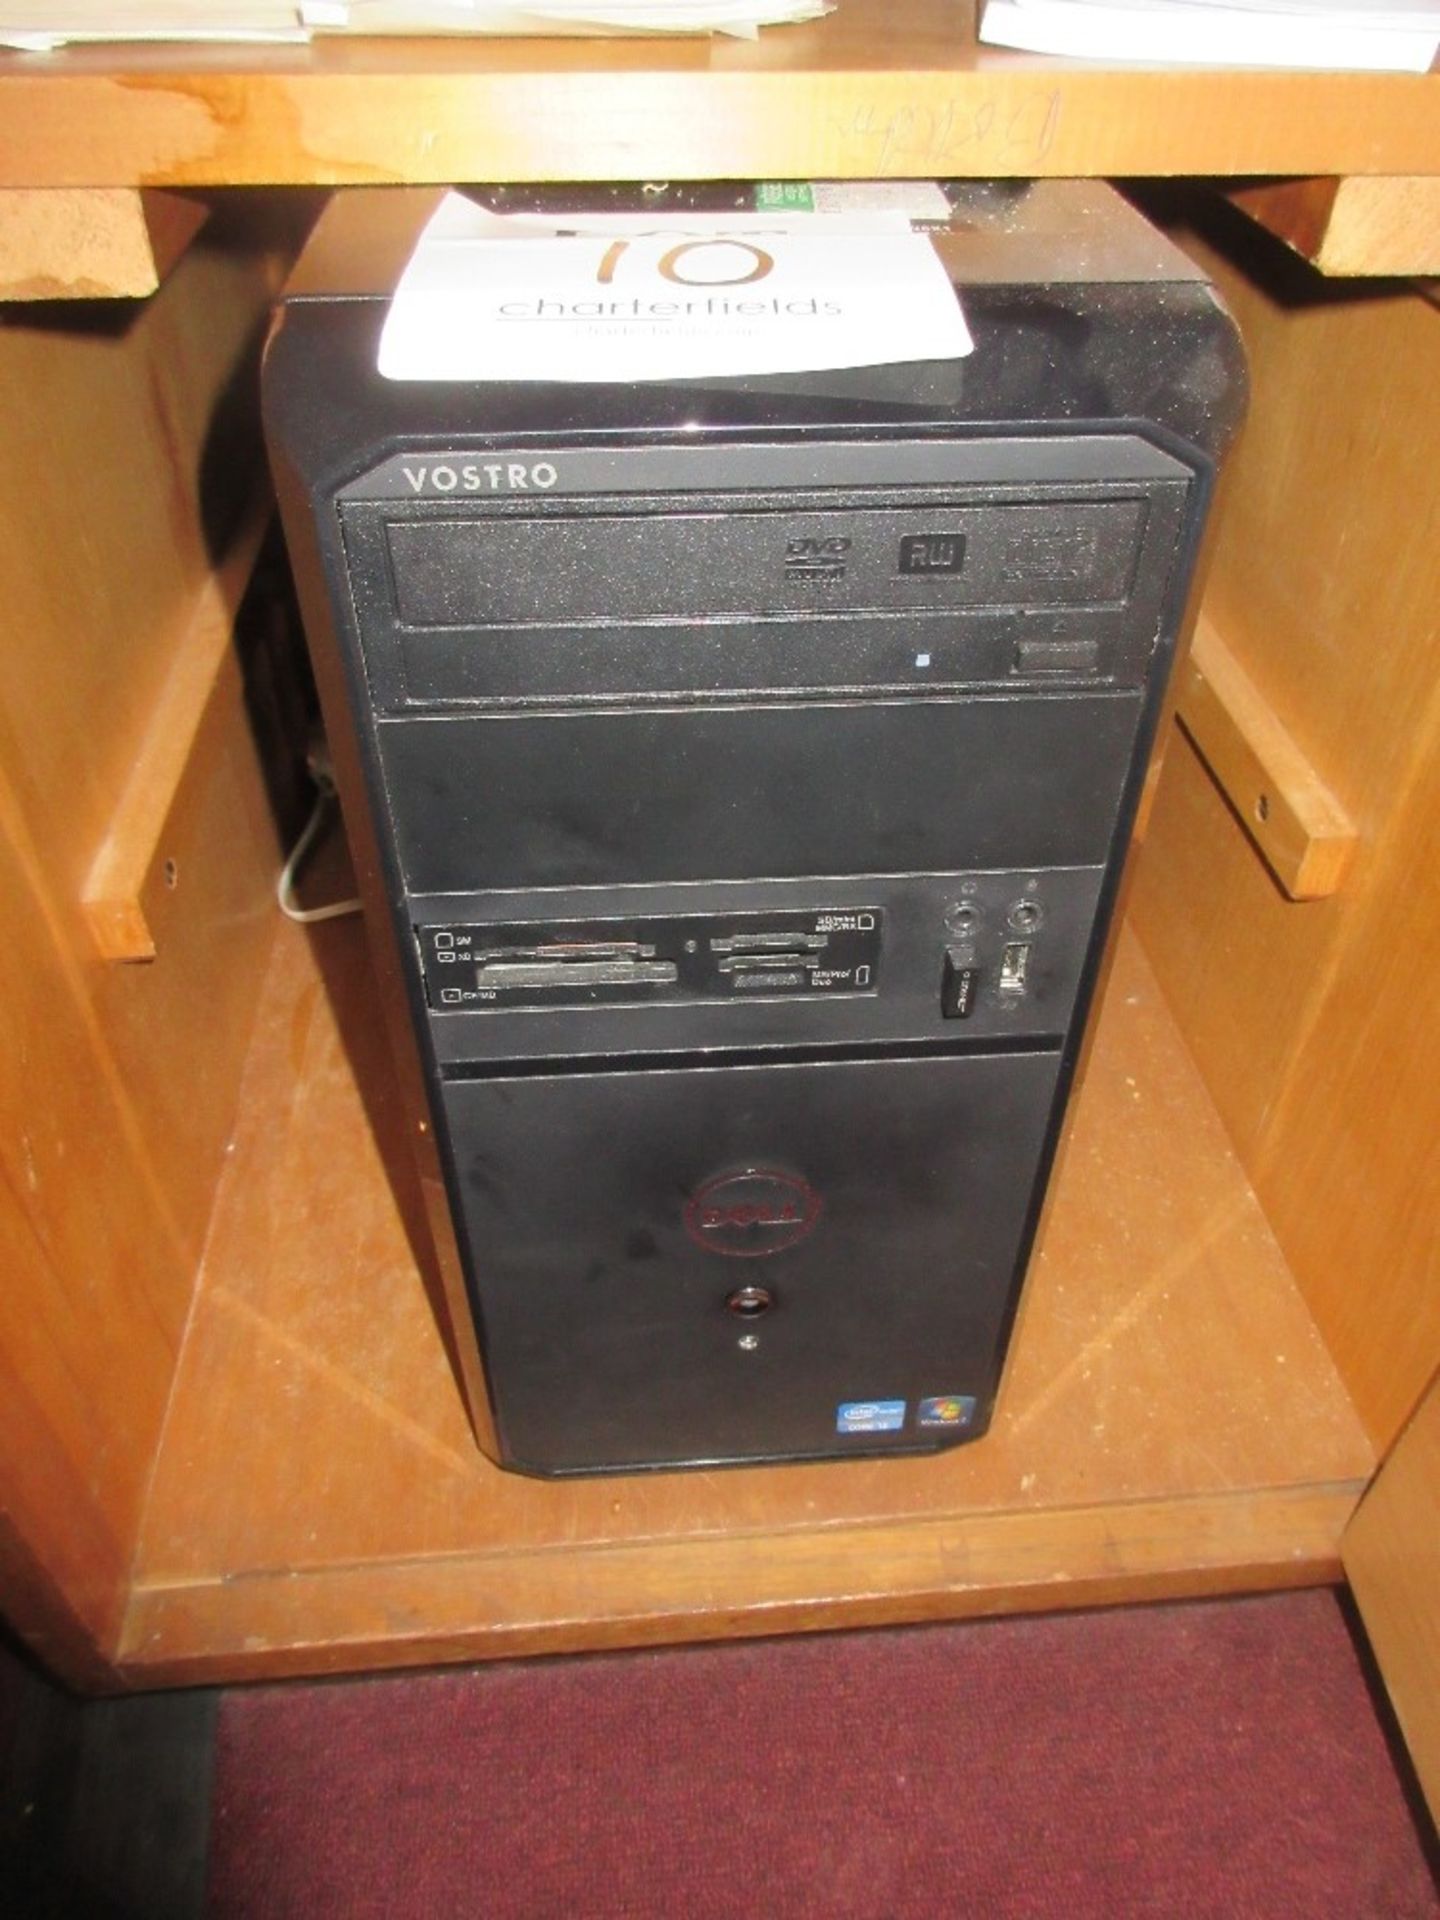 Dell Vostro mini tower PC with flat screen monitor, keyboard and mouse incorporating i5-3450 process